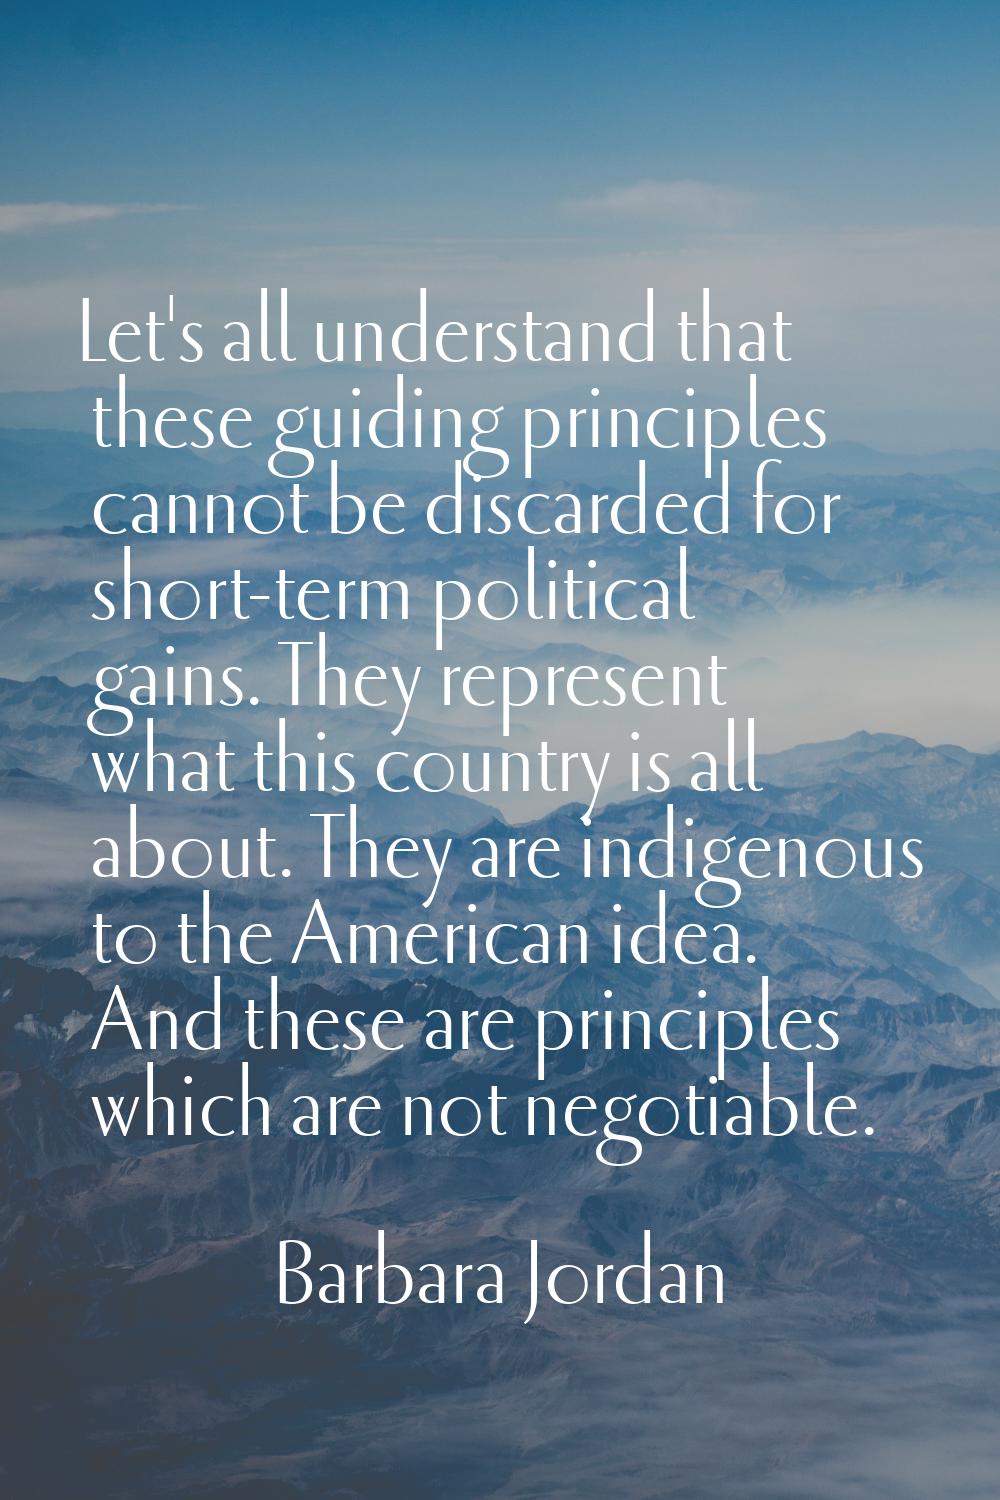 Let's all understand that these guiding principles cannot be discarded for short-term political gai